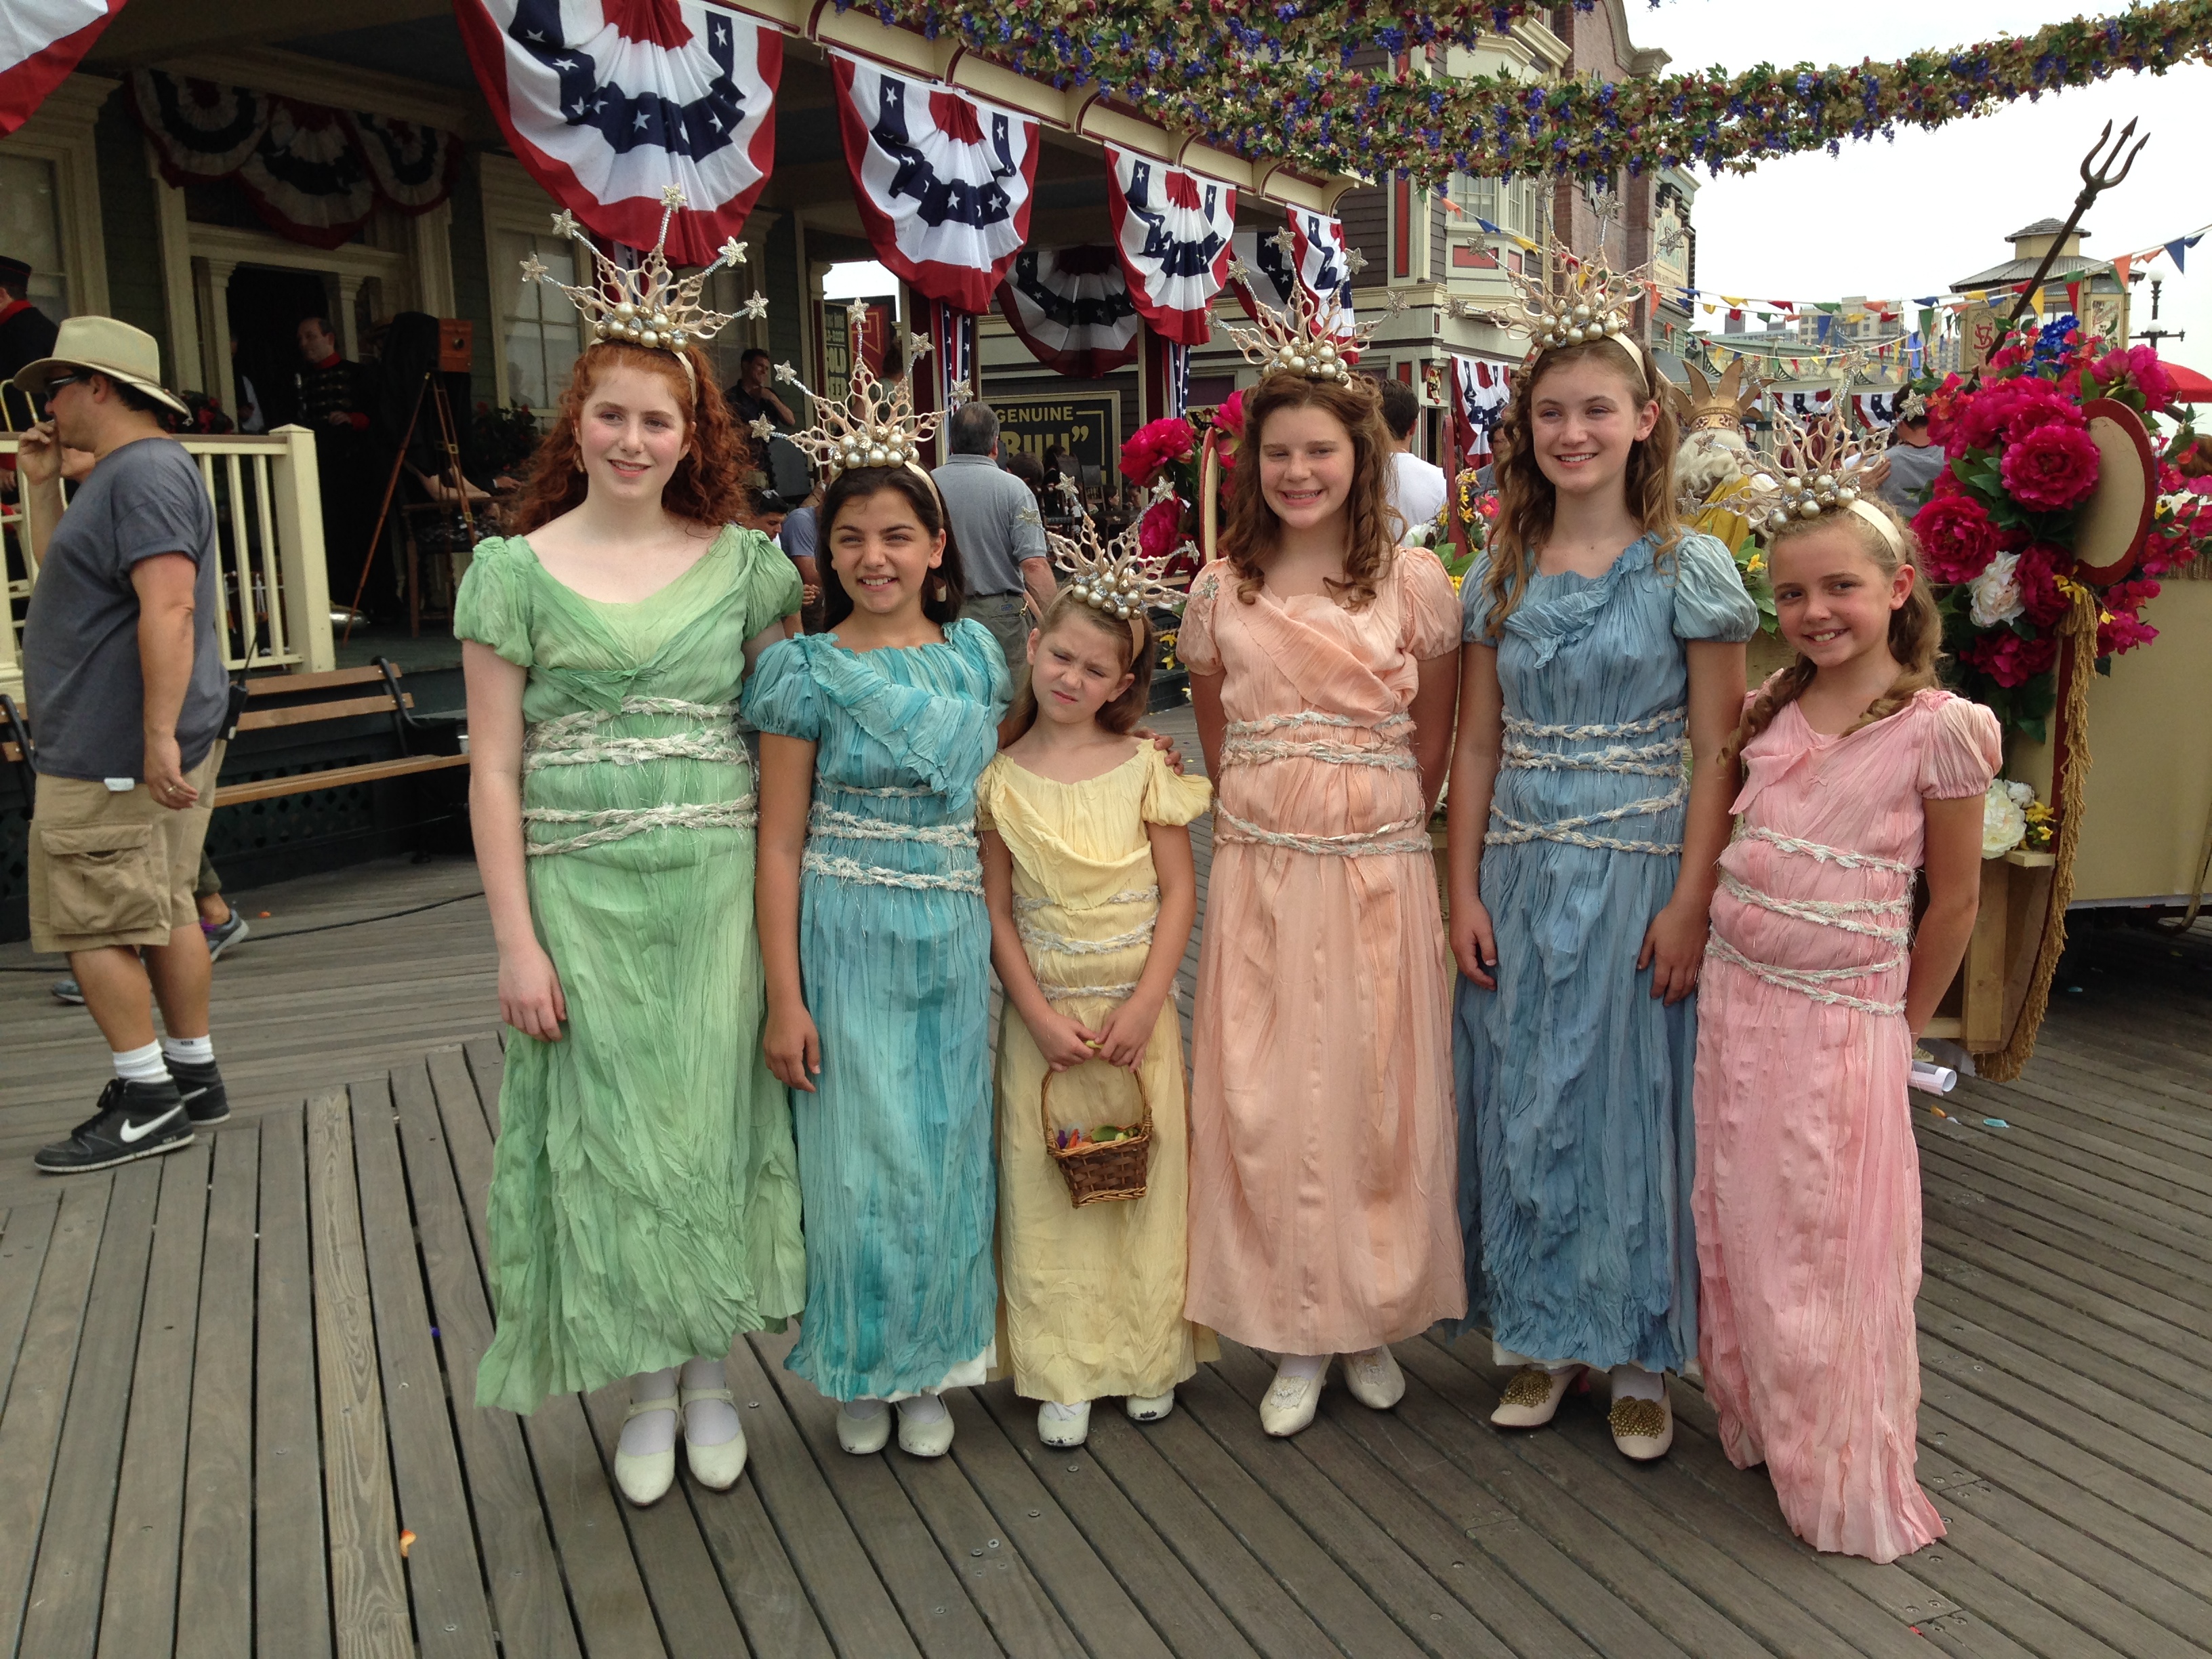 Boardwalk Empire Openin of the Sea Parade, with hand dyed, broom stick pleated dresses